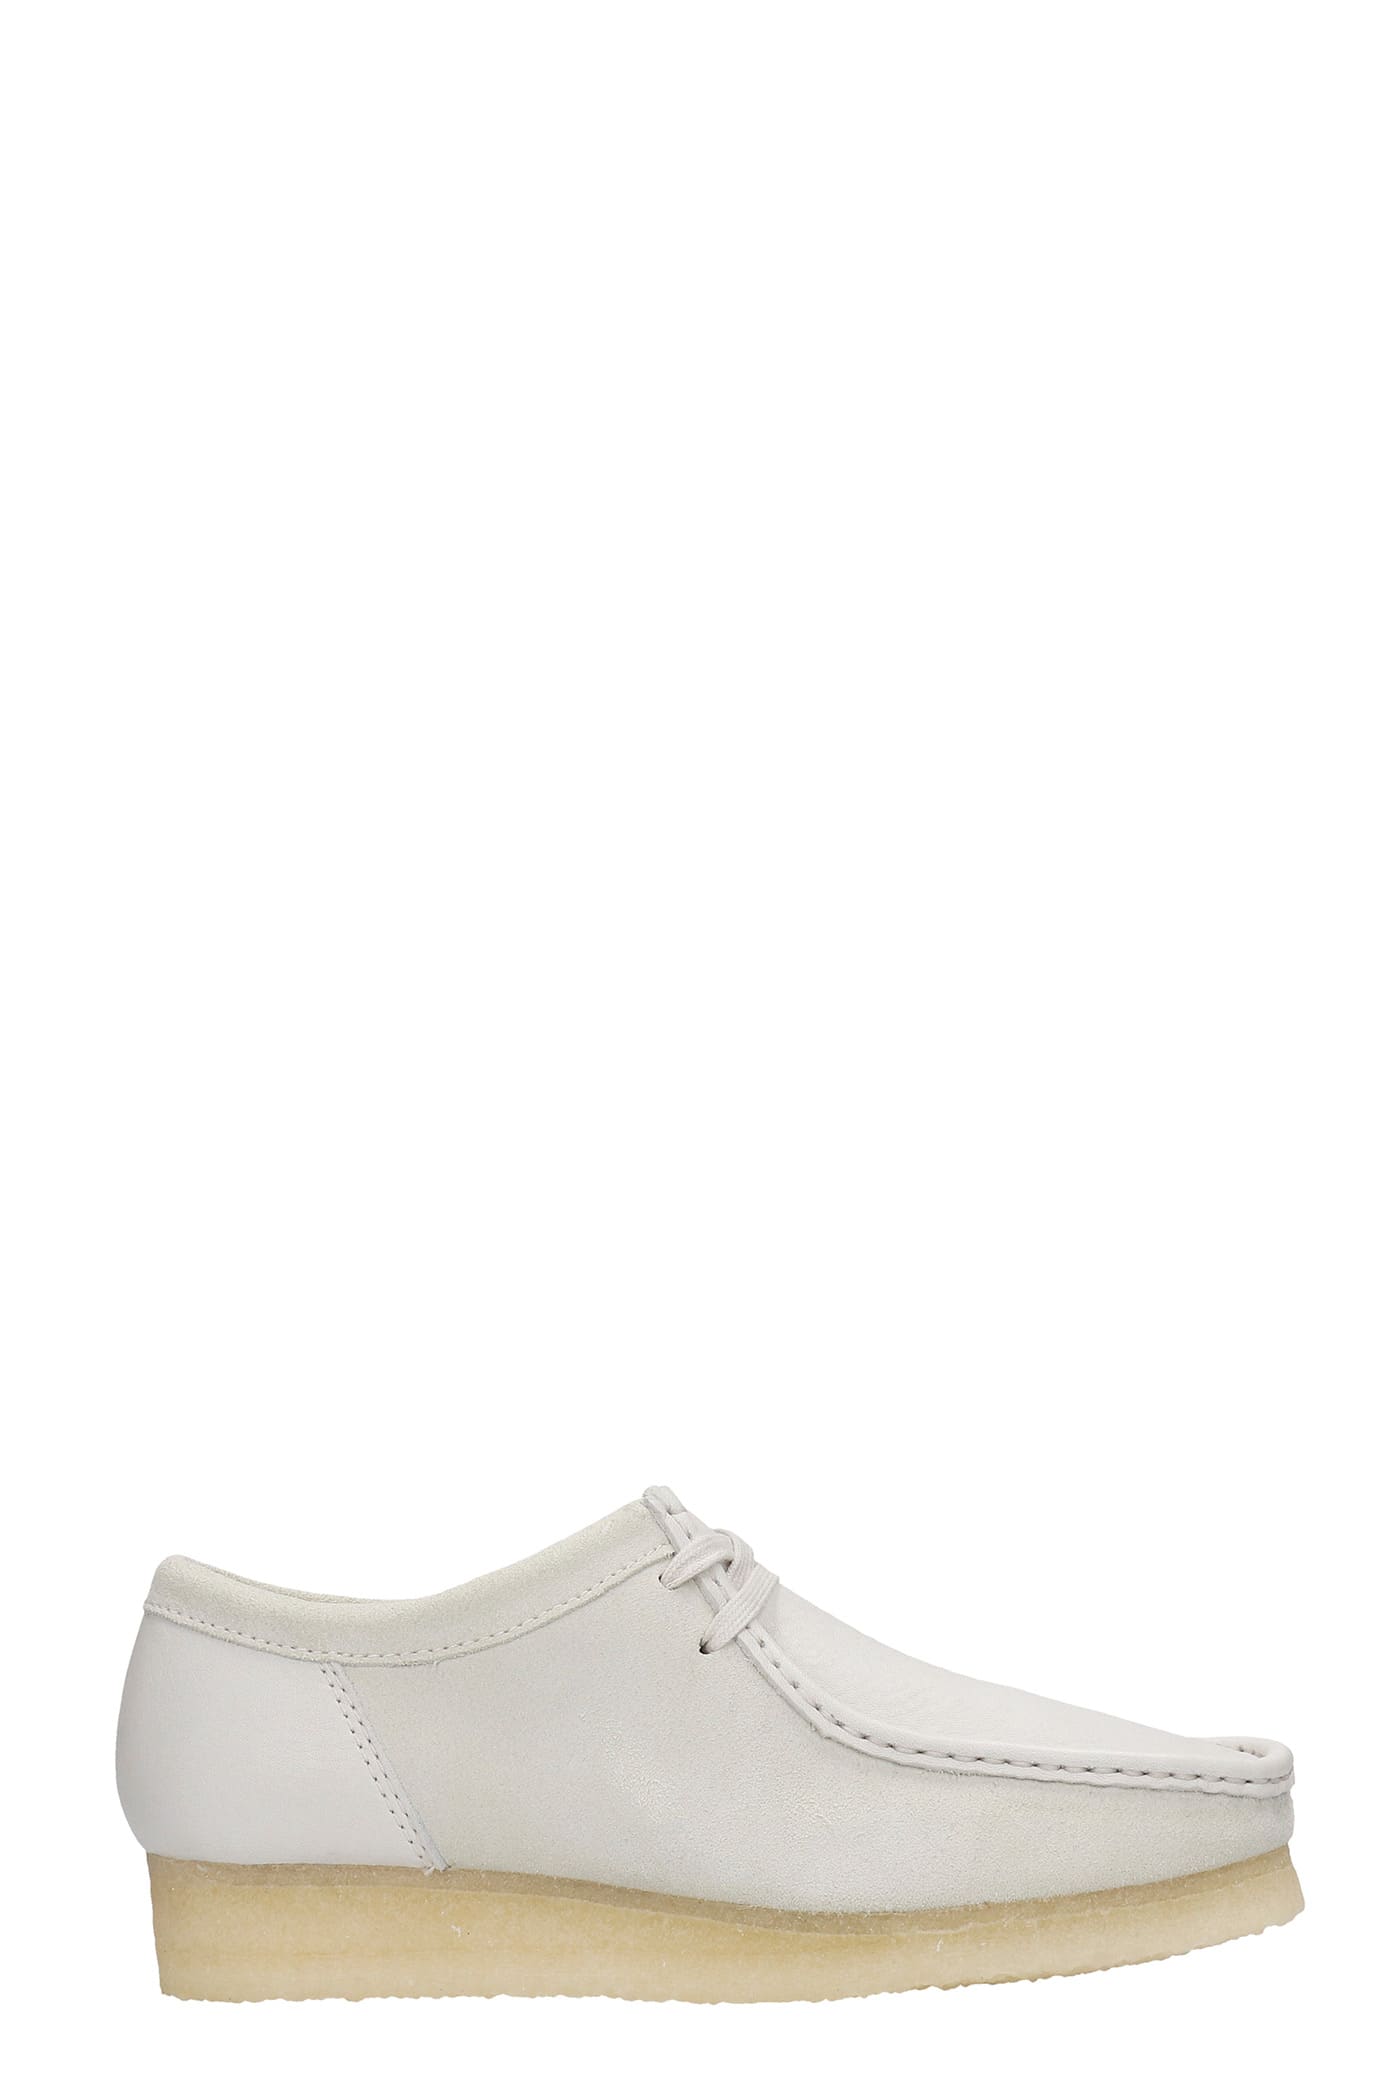 Clarks Wallabee Lace Up Shoes In White Suede And Leather